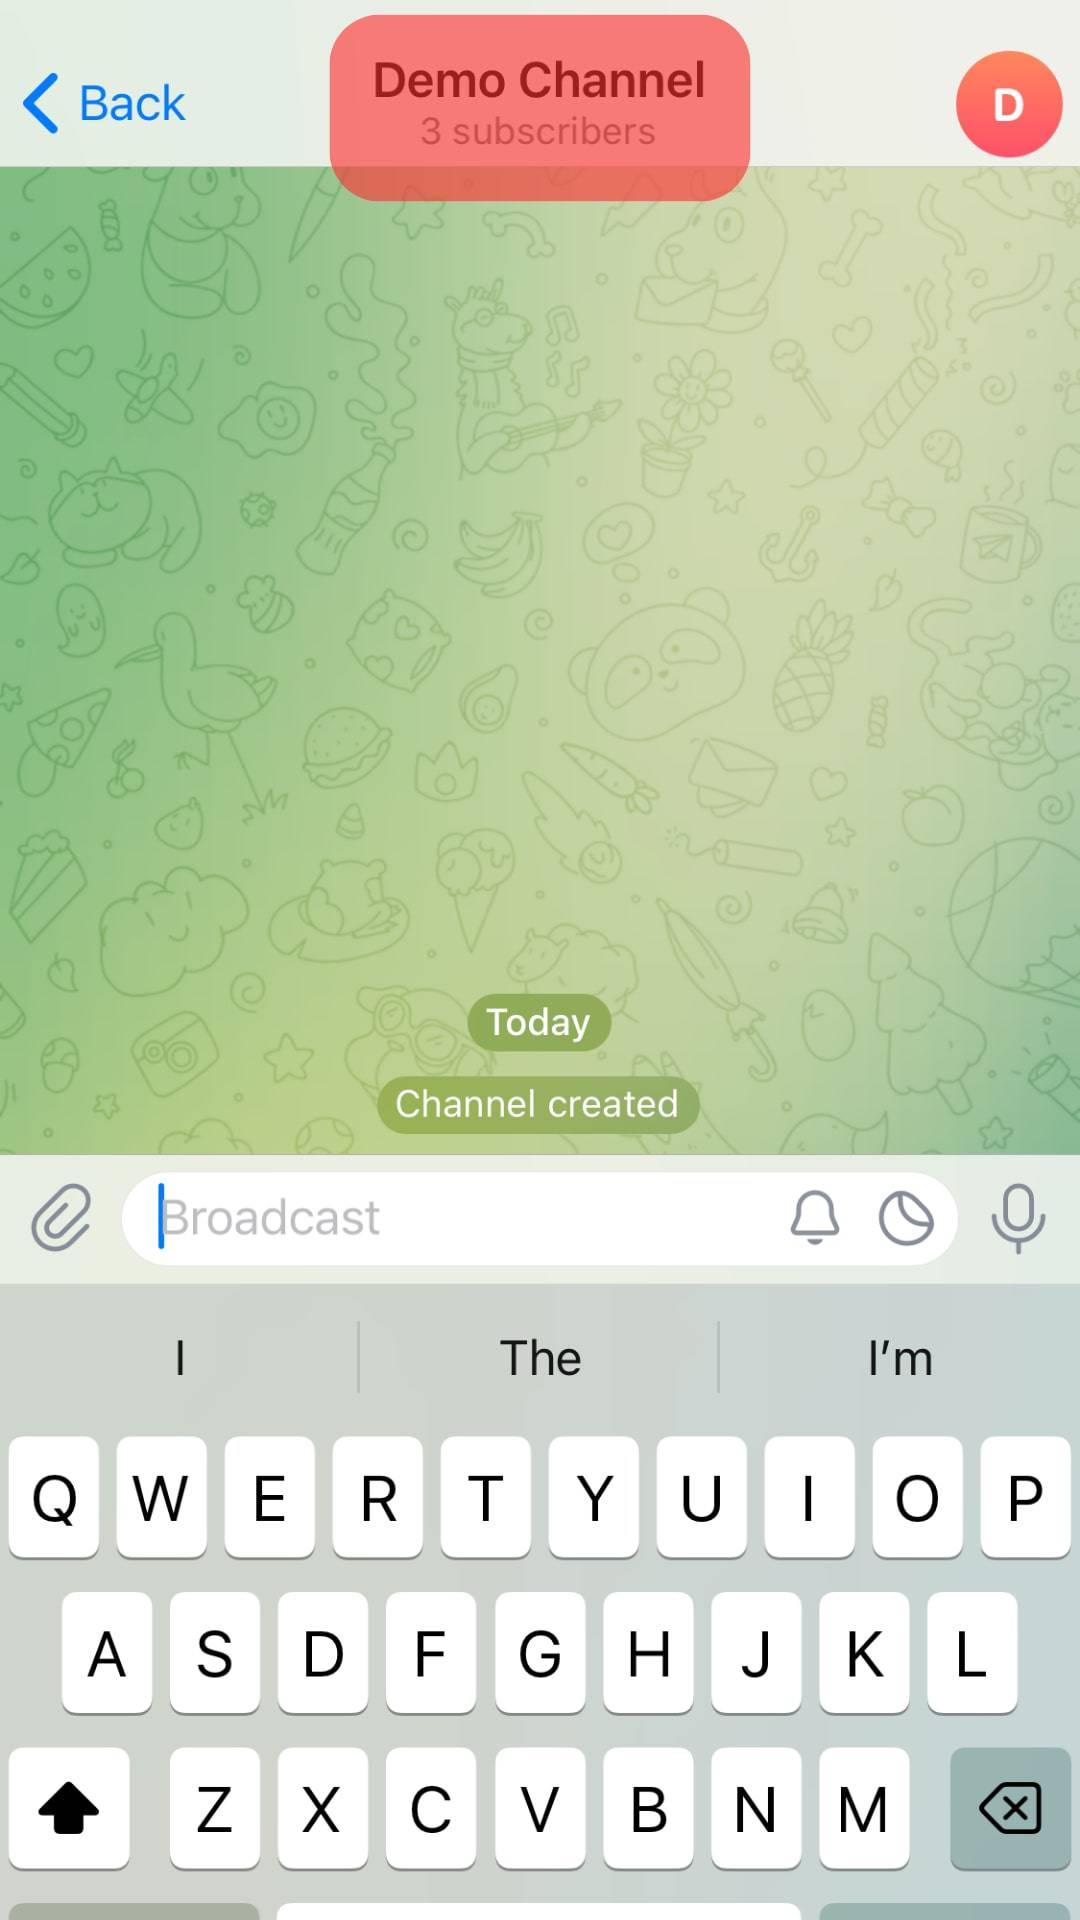 Tap On The Channel's Name At The Top.